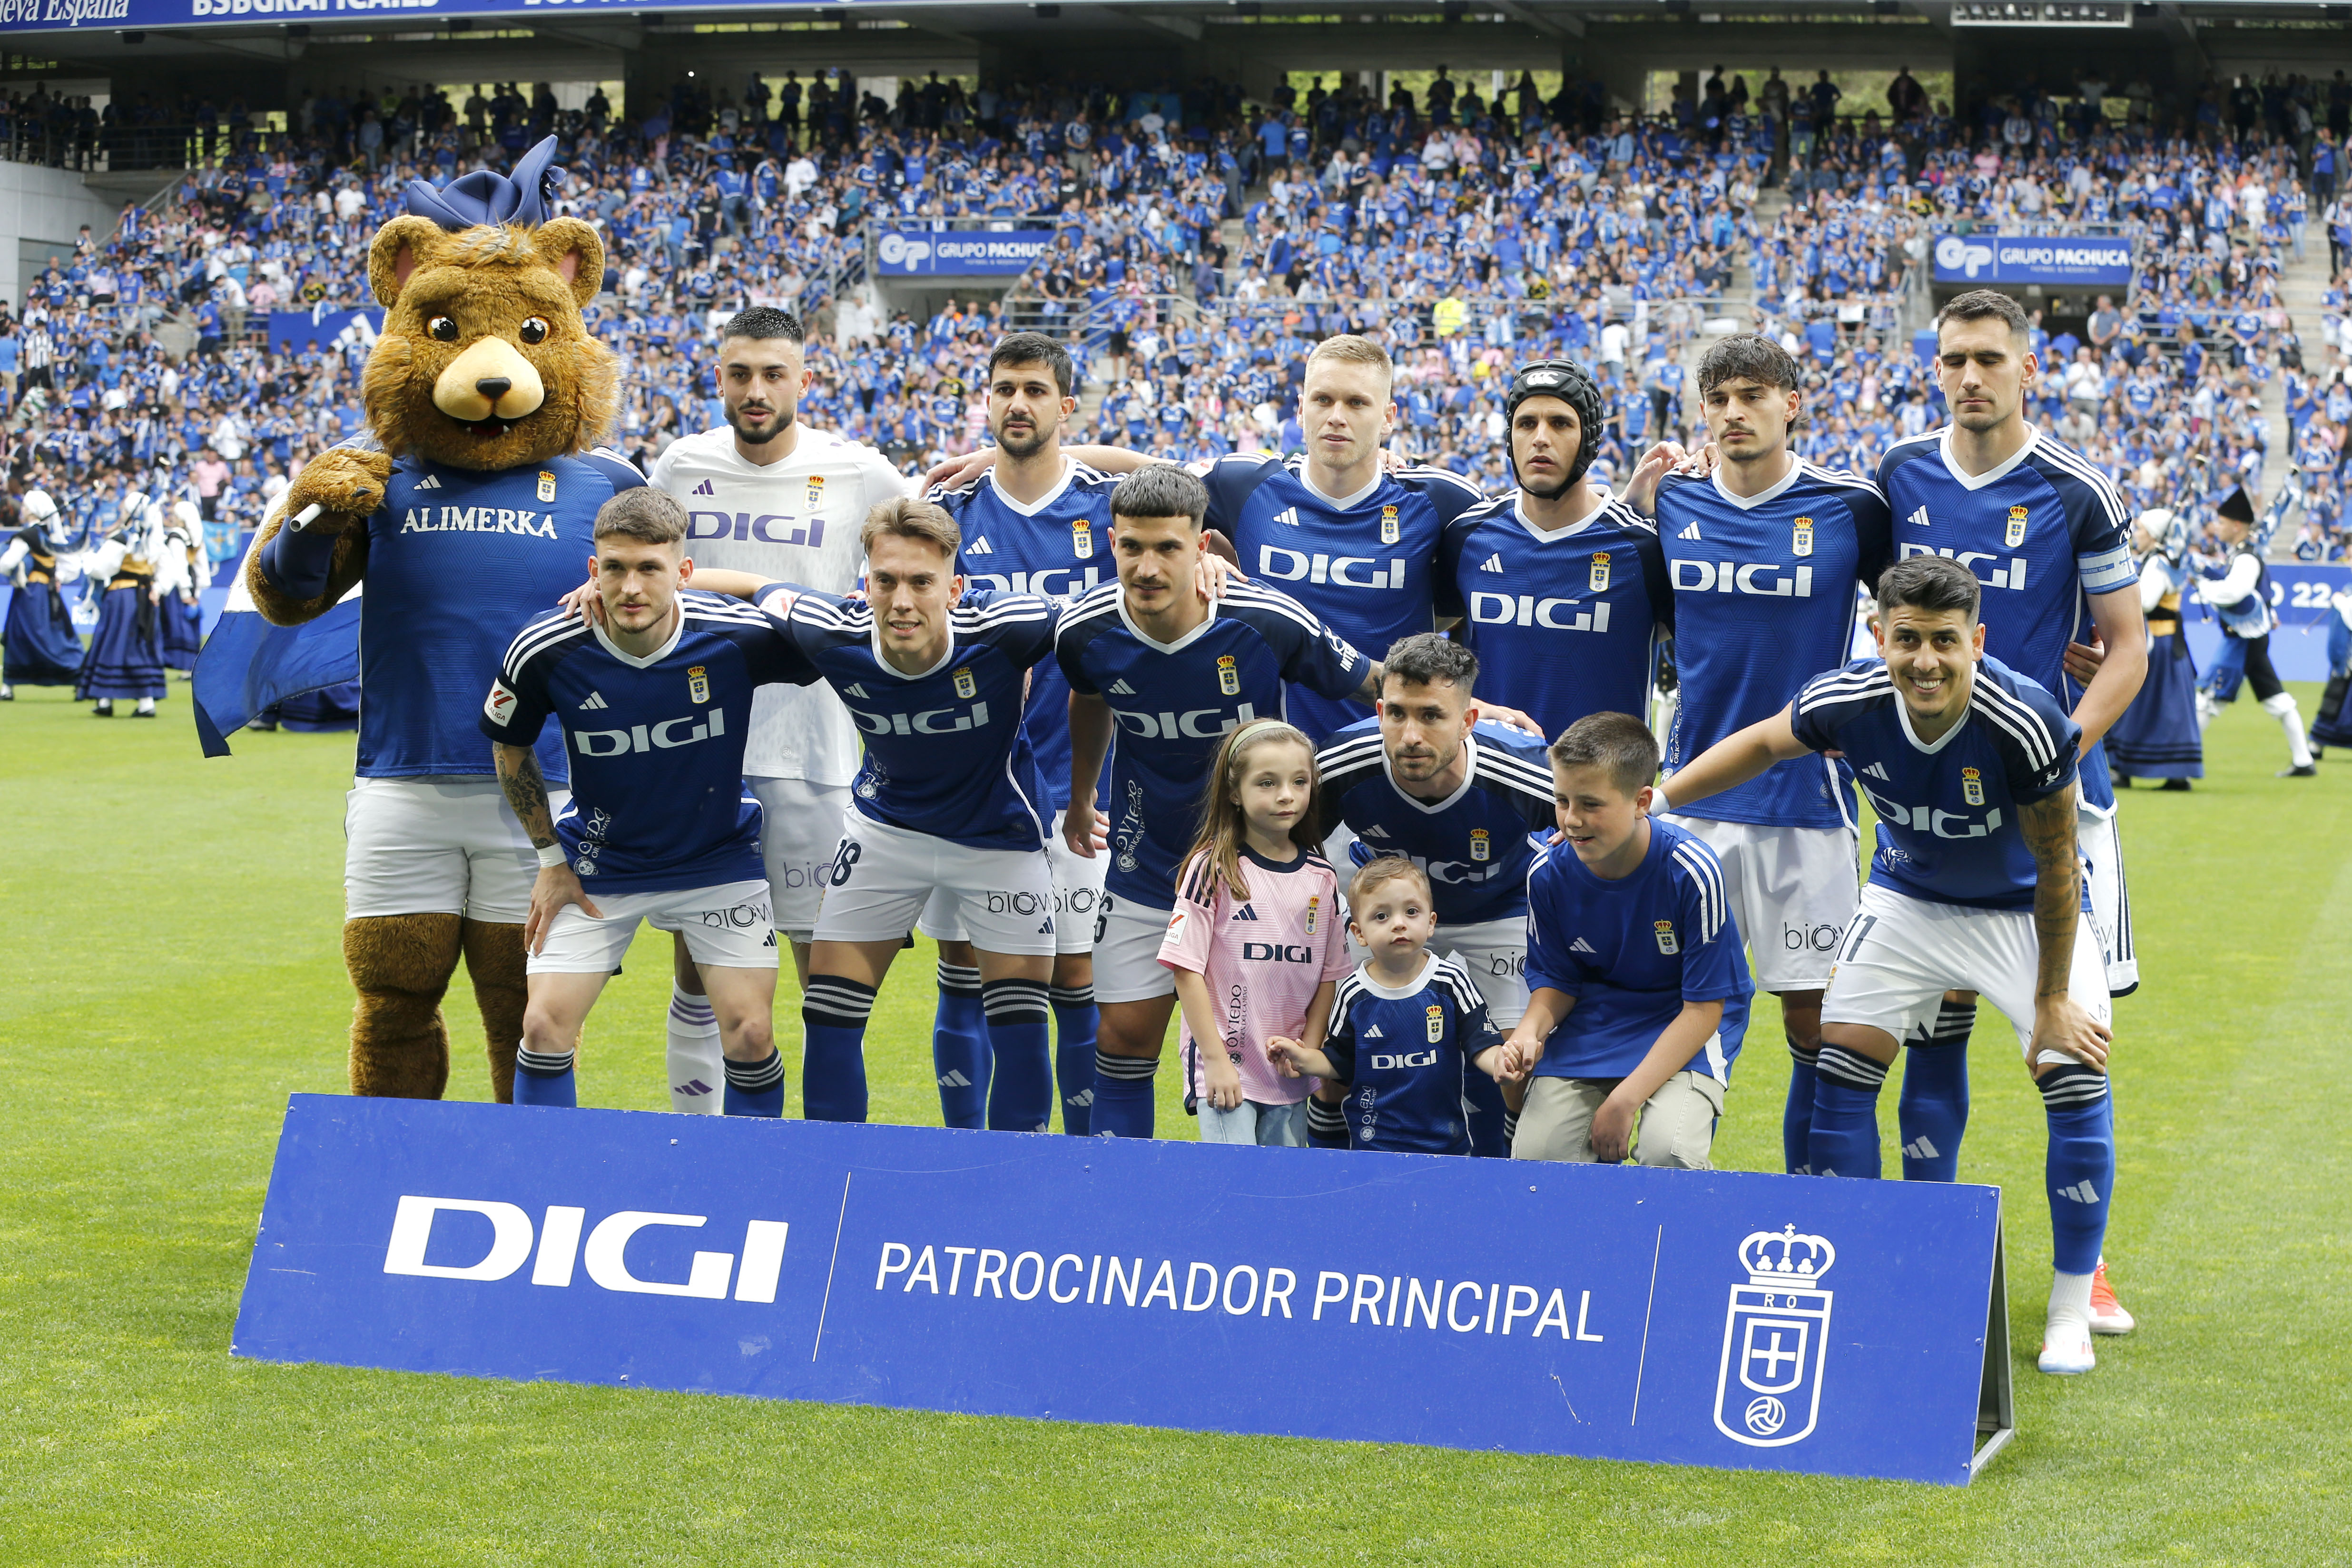 once oviedo final play off